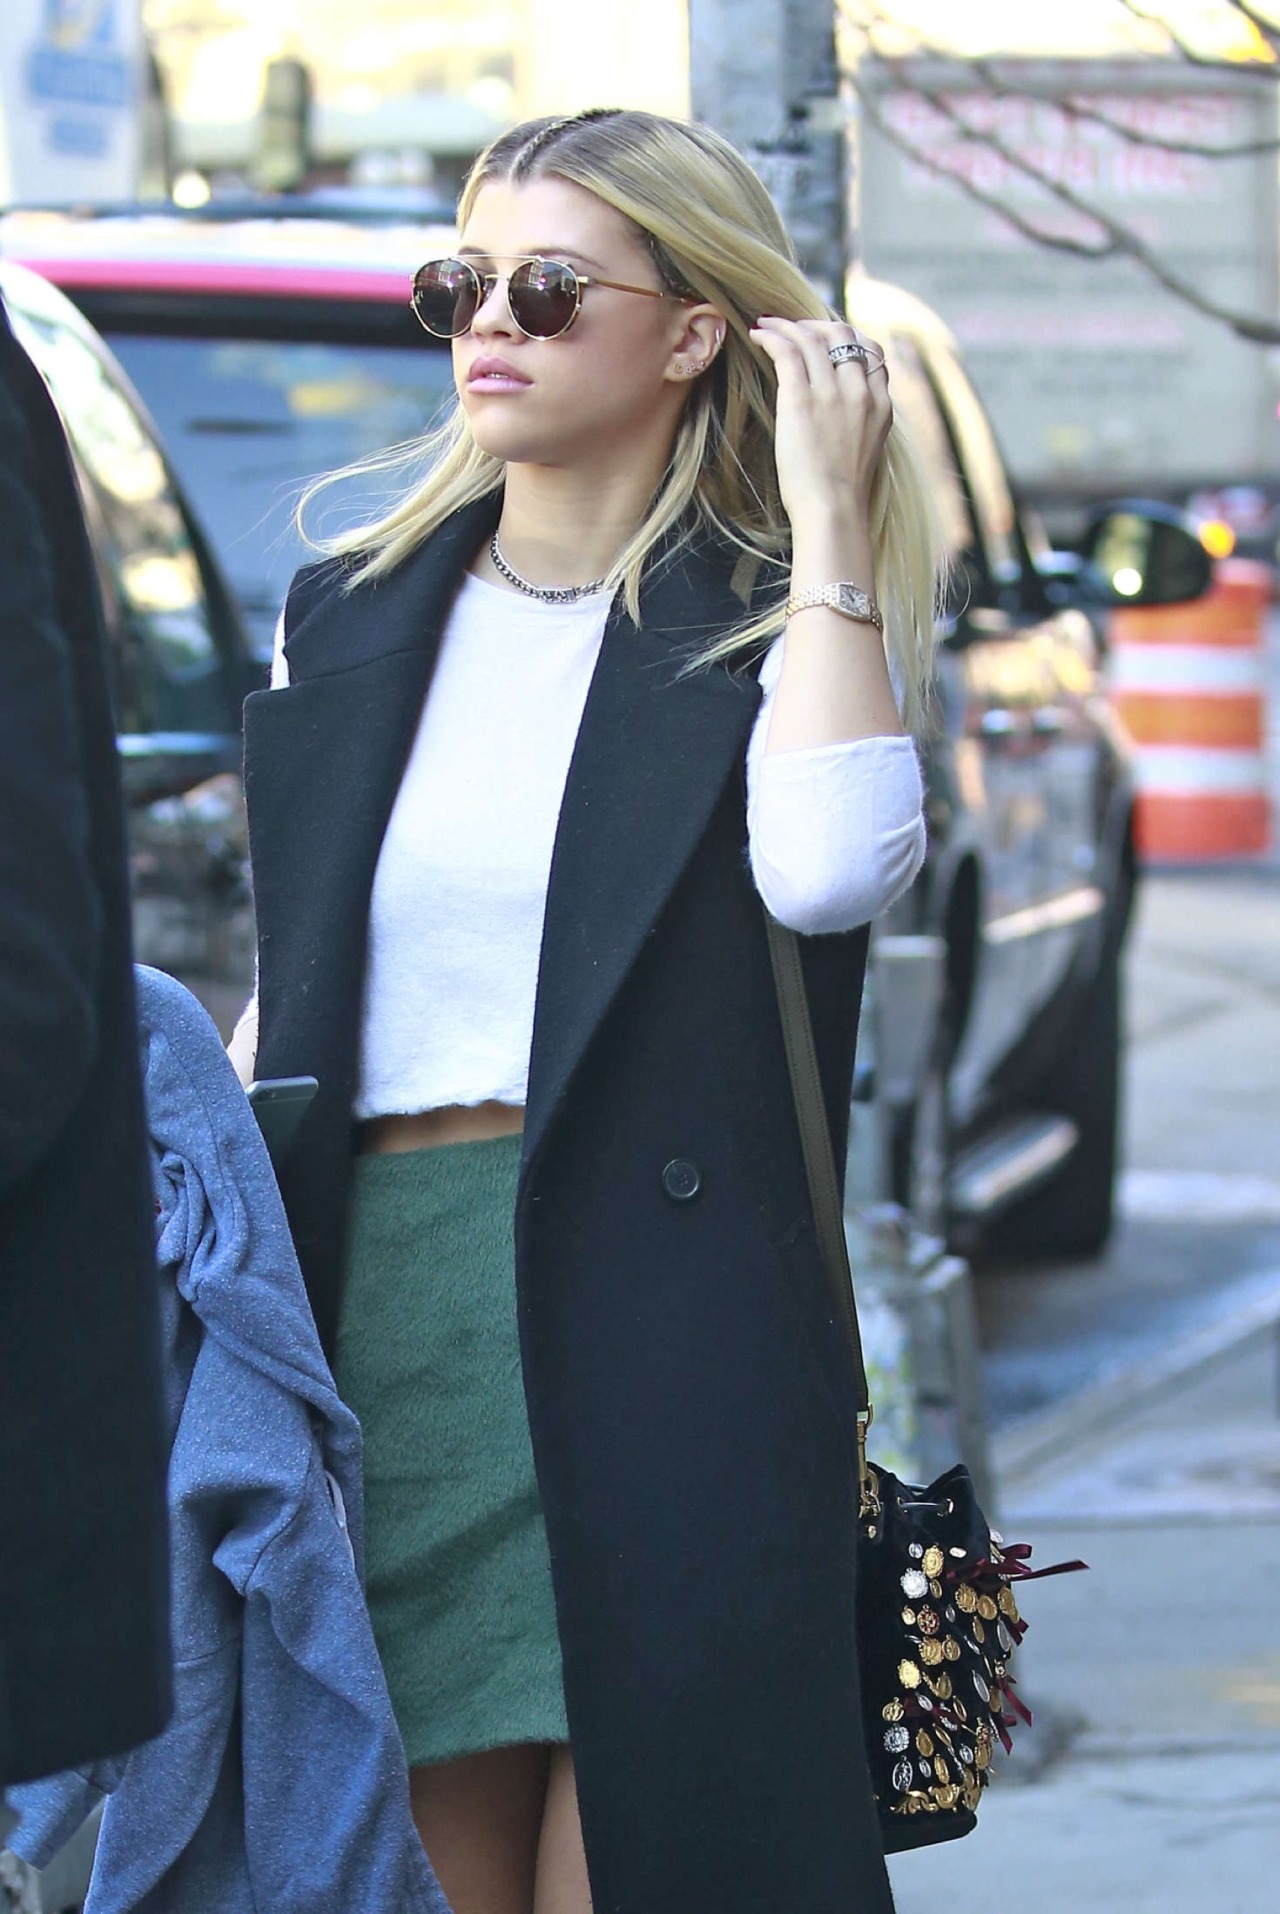 March 17, 2016 - Sofia Richie out & about in the Meat Packing District in New York City.